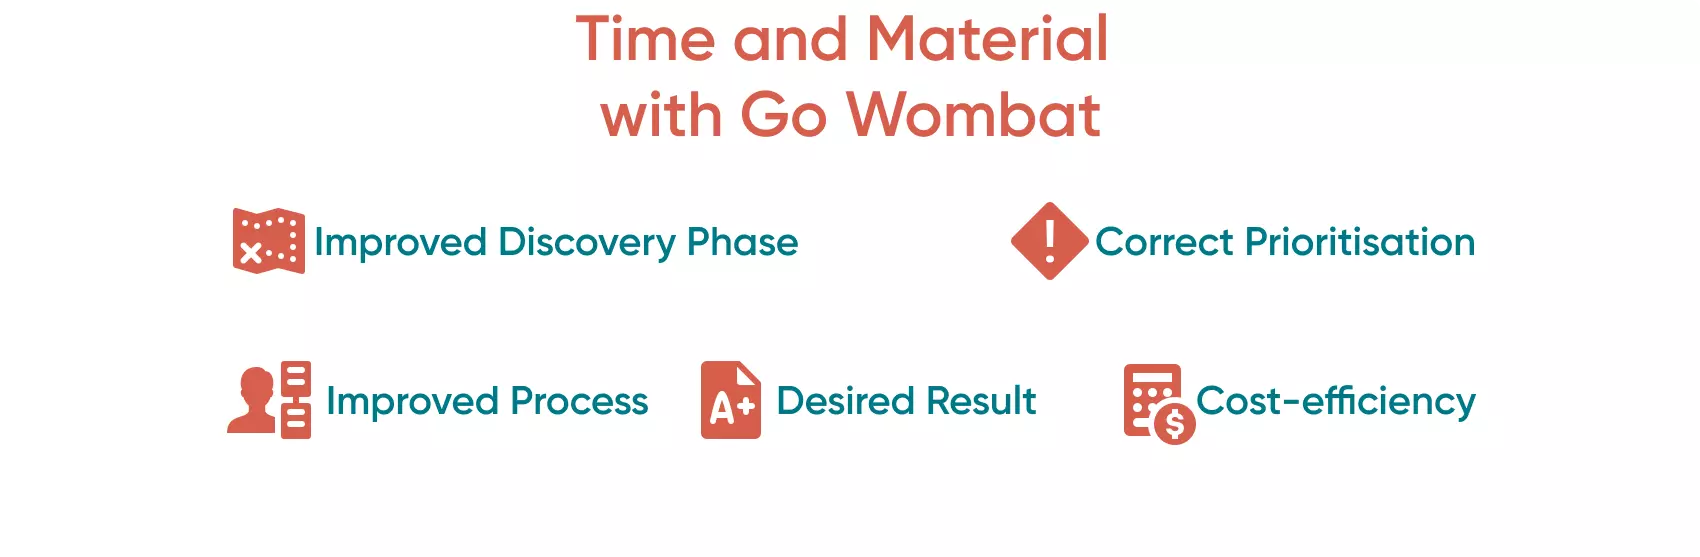 Go Wombat has a large experience in software development, so the company knows why Time and Material is better from firsthand experience..